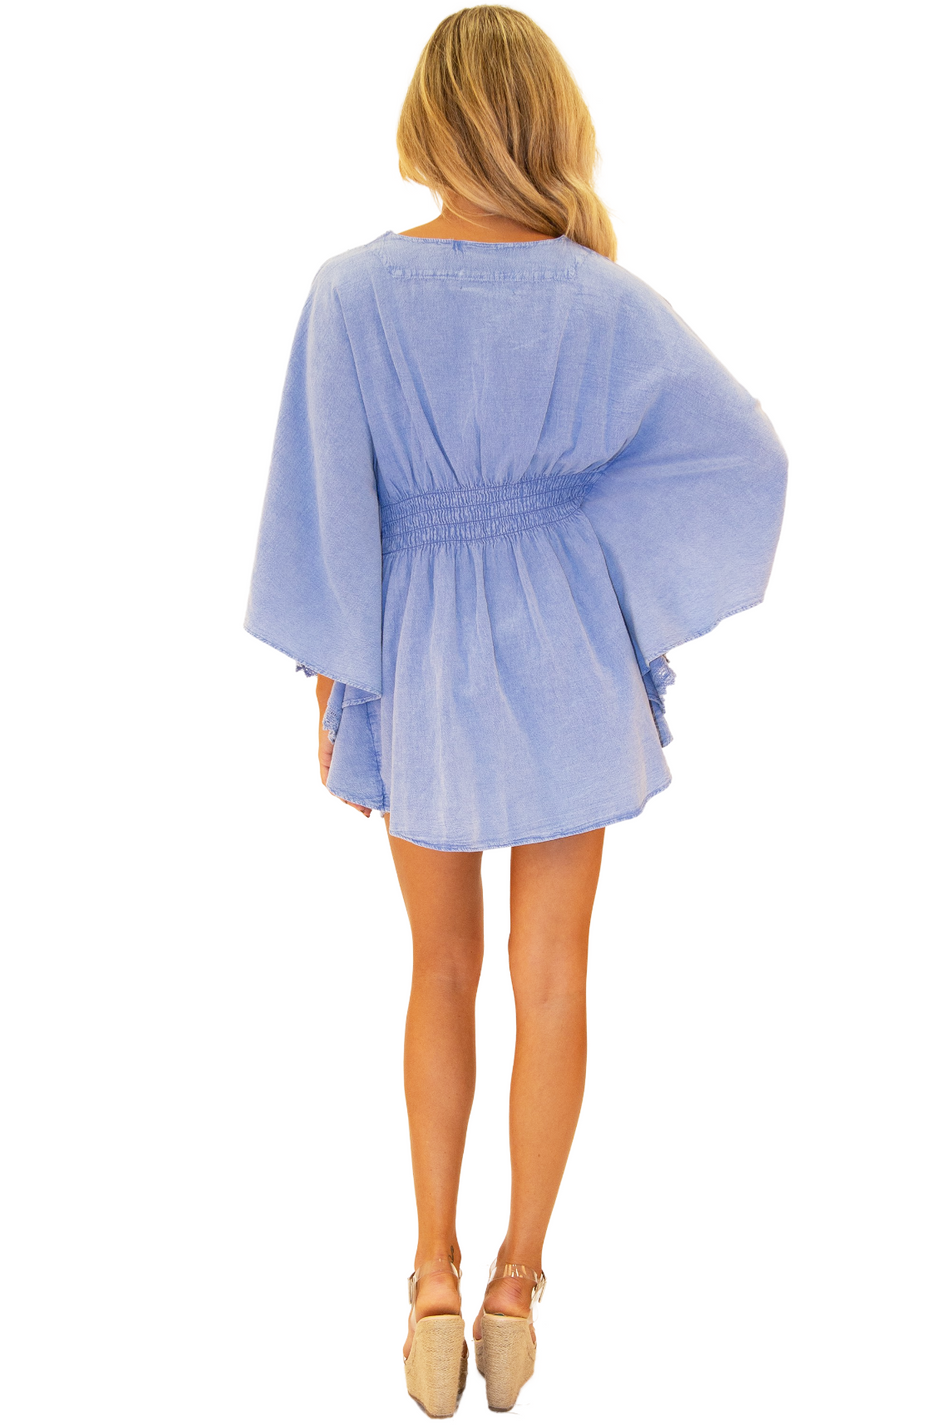 'Amelia' Butterfly Sleeves Cover-Up Blue